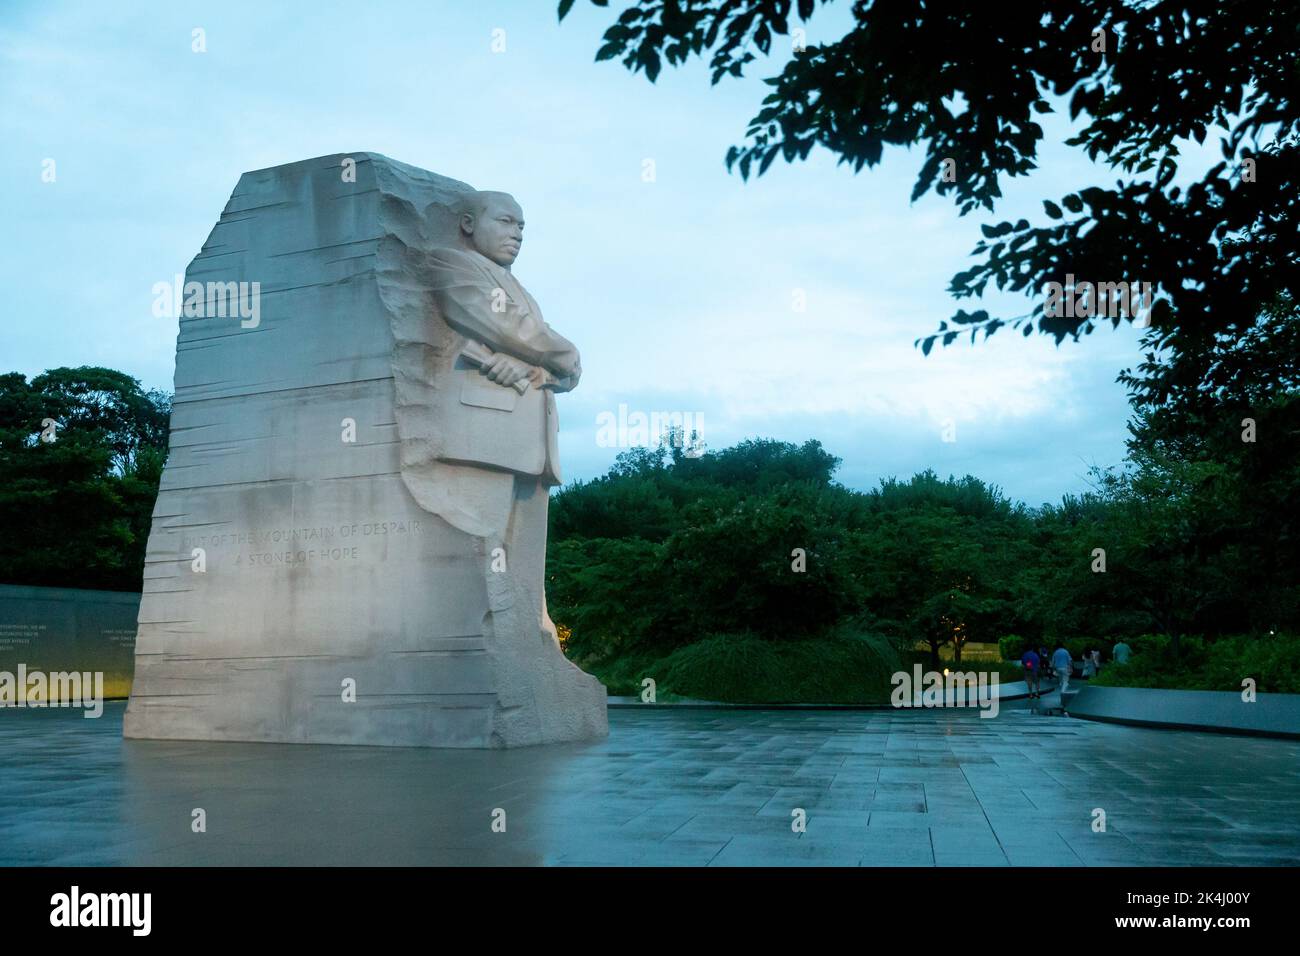 The Martin Luther King, Jr. Memorial is a national memorial located in West Potomac Park next to the National Mall in Washington, D.C., United States. It covers four acres  and includes the Stone of Hope, a granite statue of Civil Rights Movement leader Martin Luther King Jr. carved by sculptor Lei Yixin. The inspiration for the memorial design is a line from King's 'I Have a Dream' speech: 'Out of the mountain of despair, a stone of hope.' The memorial opened to the public on August 22, 2011, after more than two decades of planning, fund-raising, and construction. Stock Photo